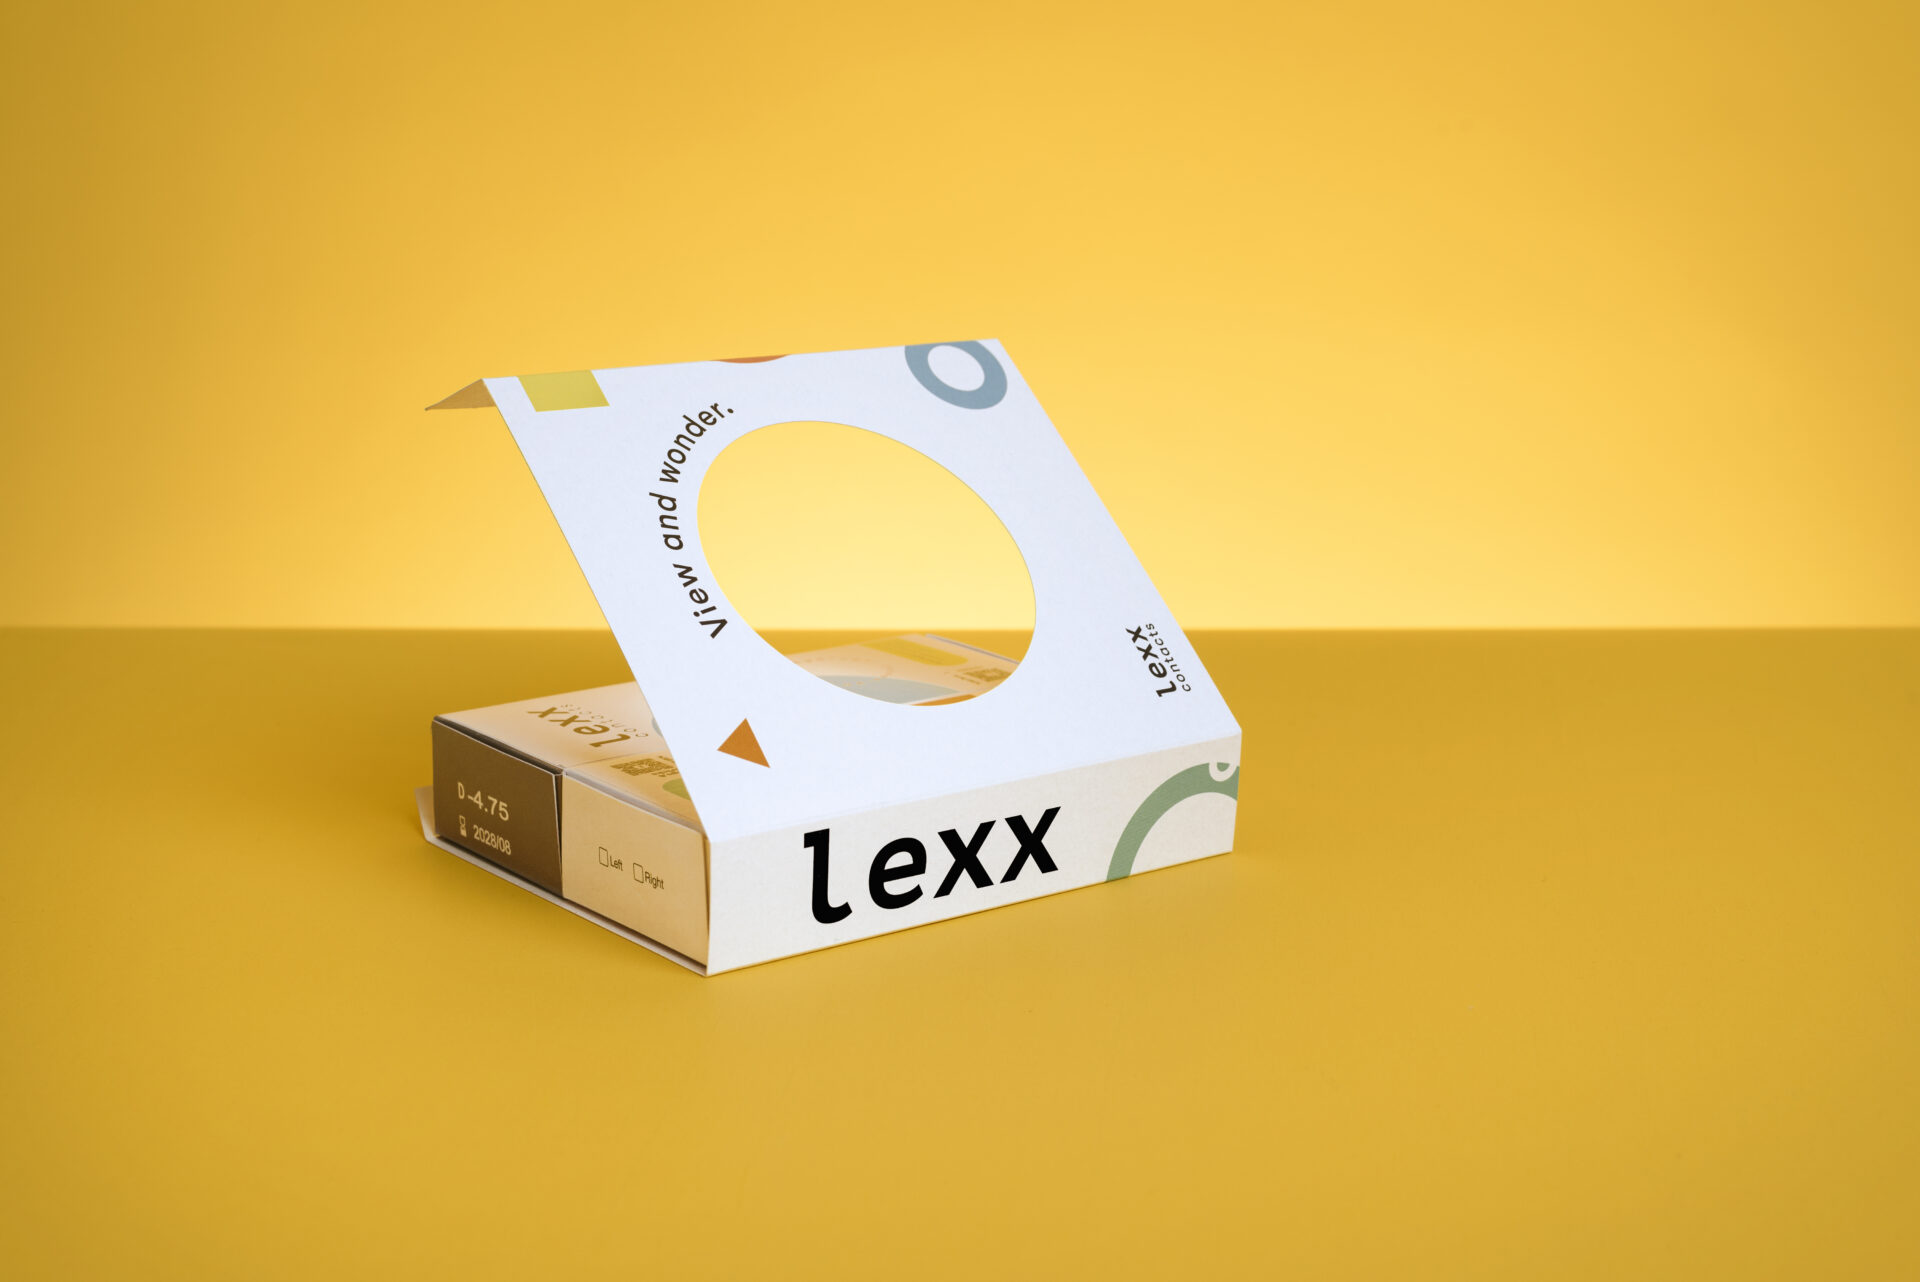 wp content uploads  0   05  eco friendly packaging contacts agri waste paper lexx lexxcontacts